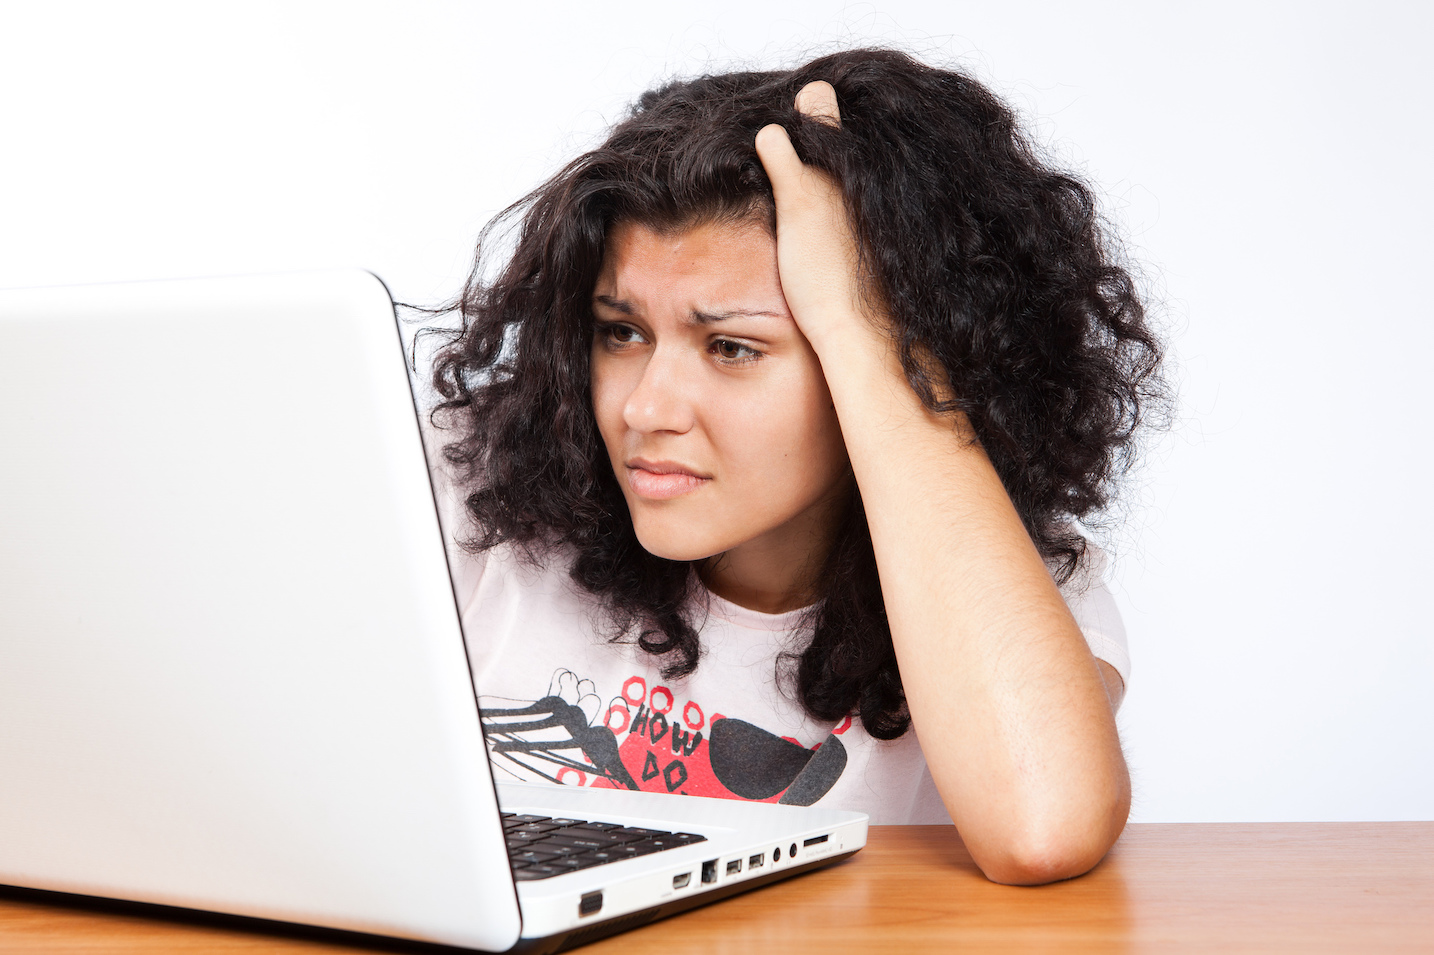 frustrated woman at computer